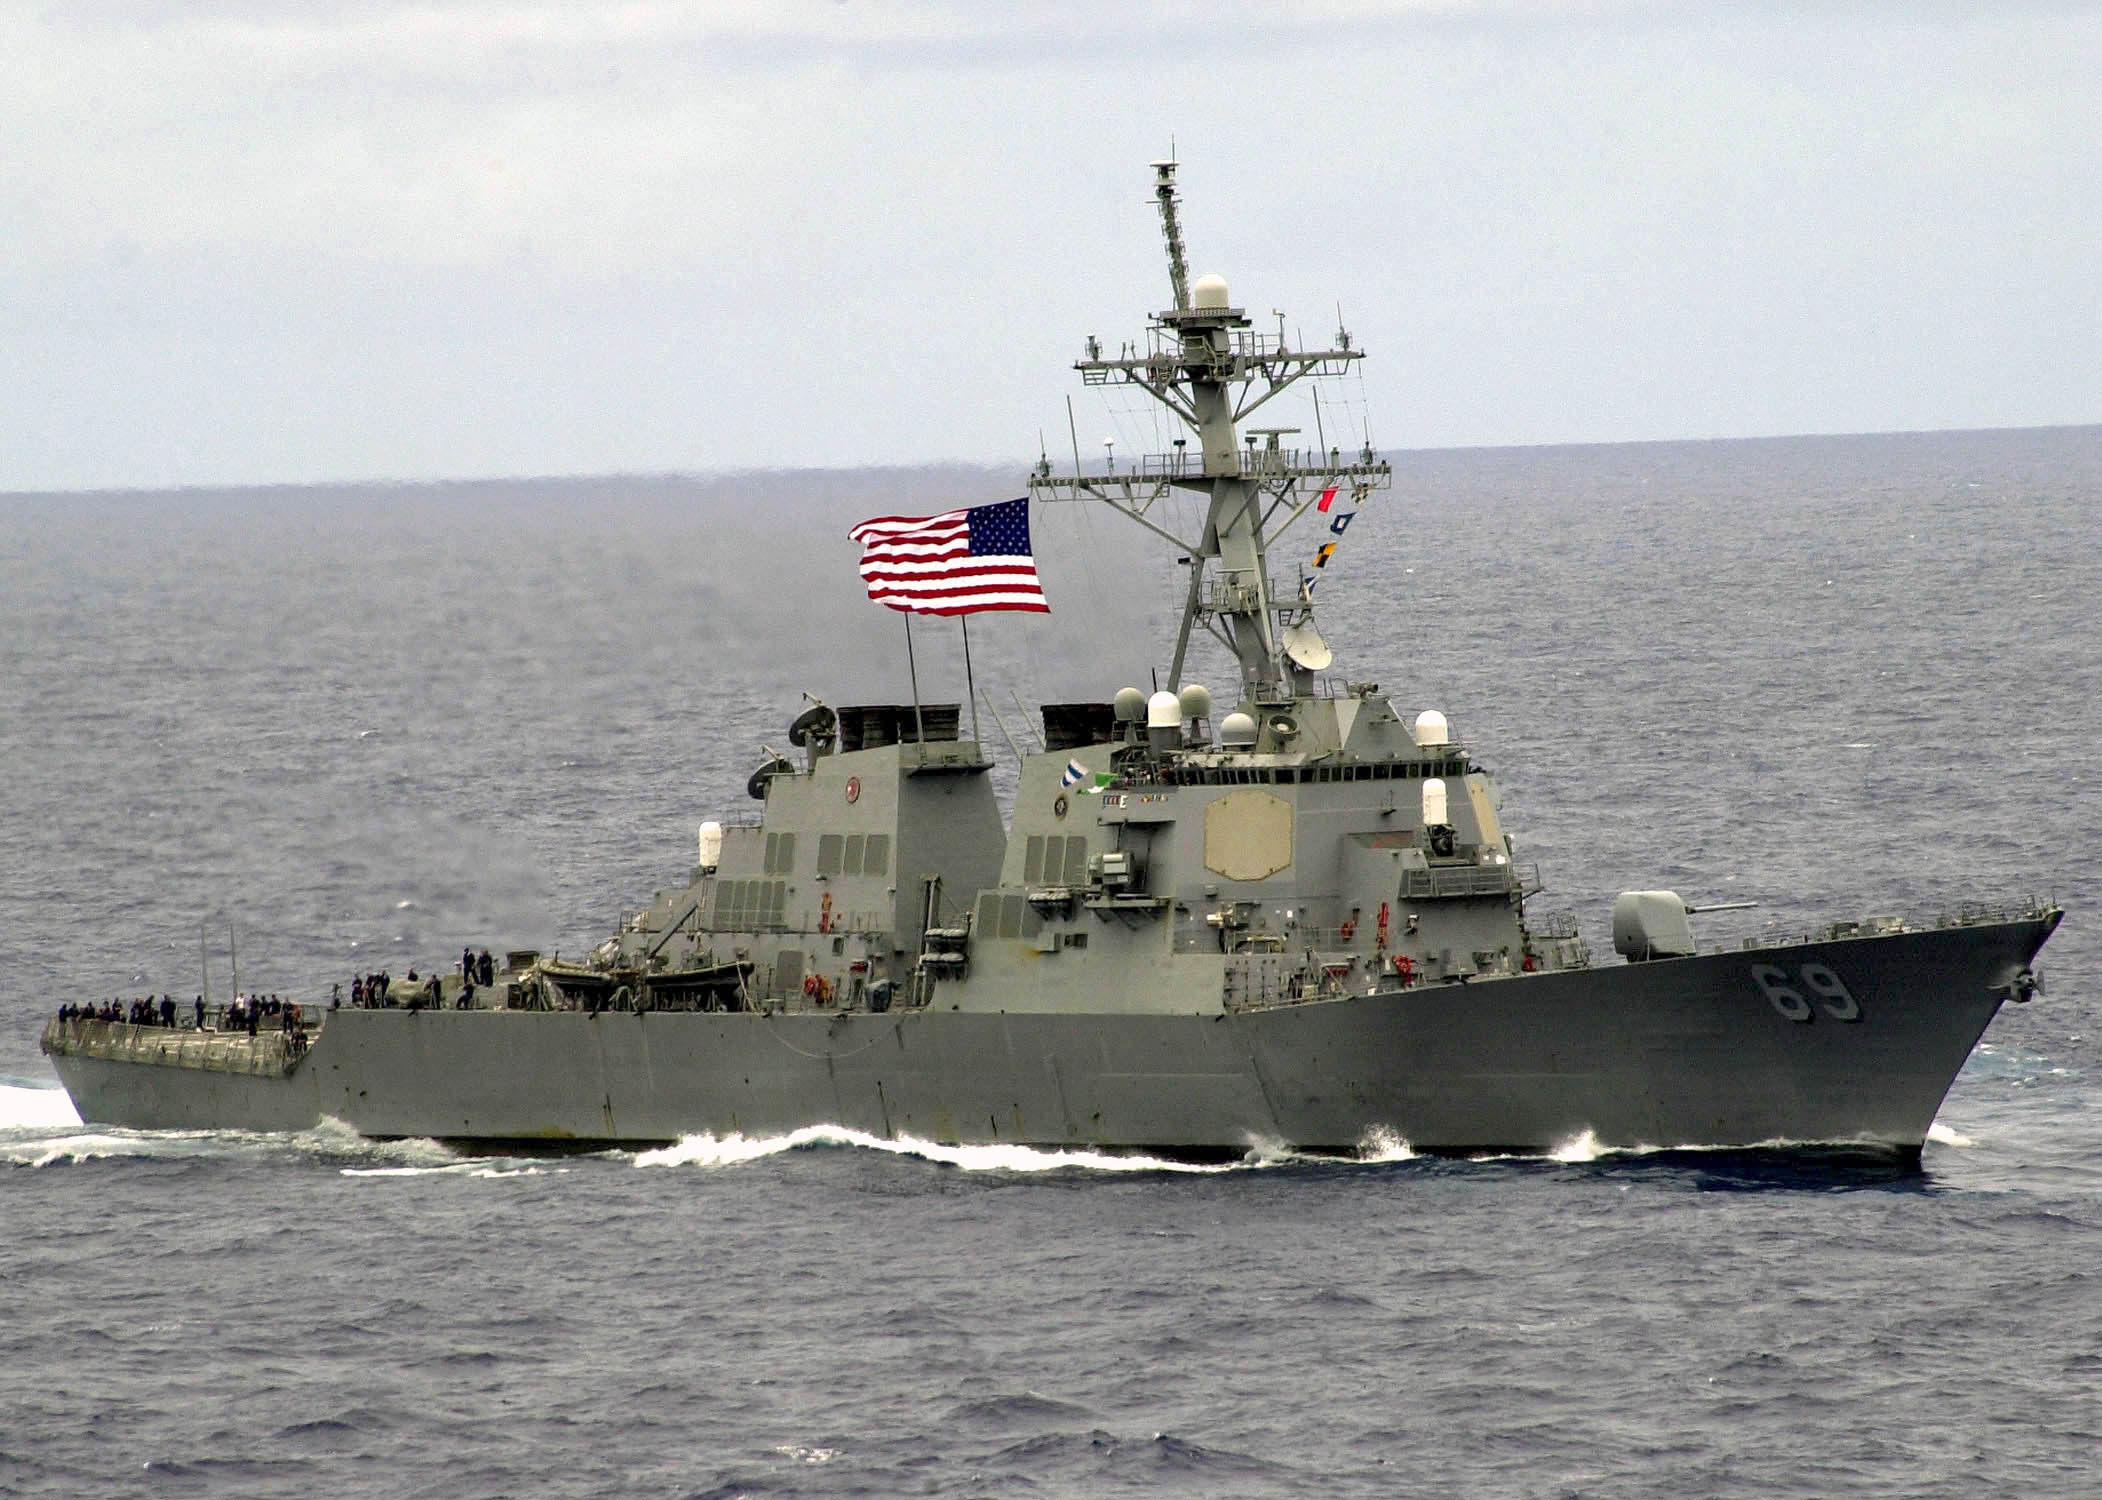 U.S. Navy says destroyer asserted navigational rights in South China Sea